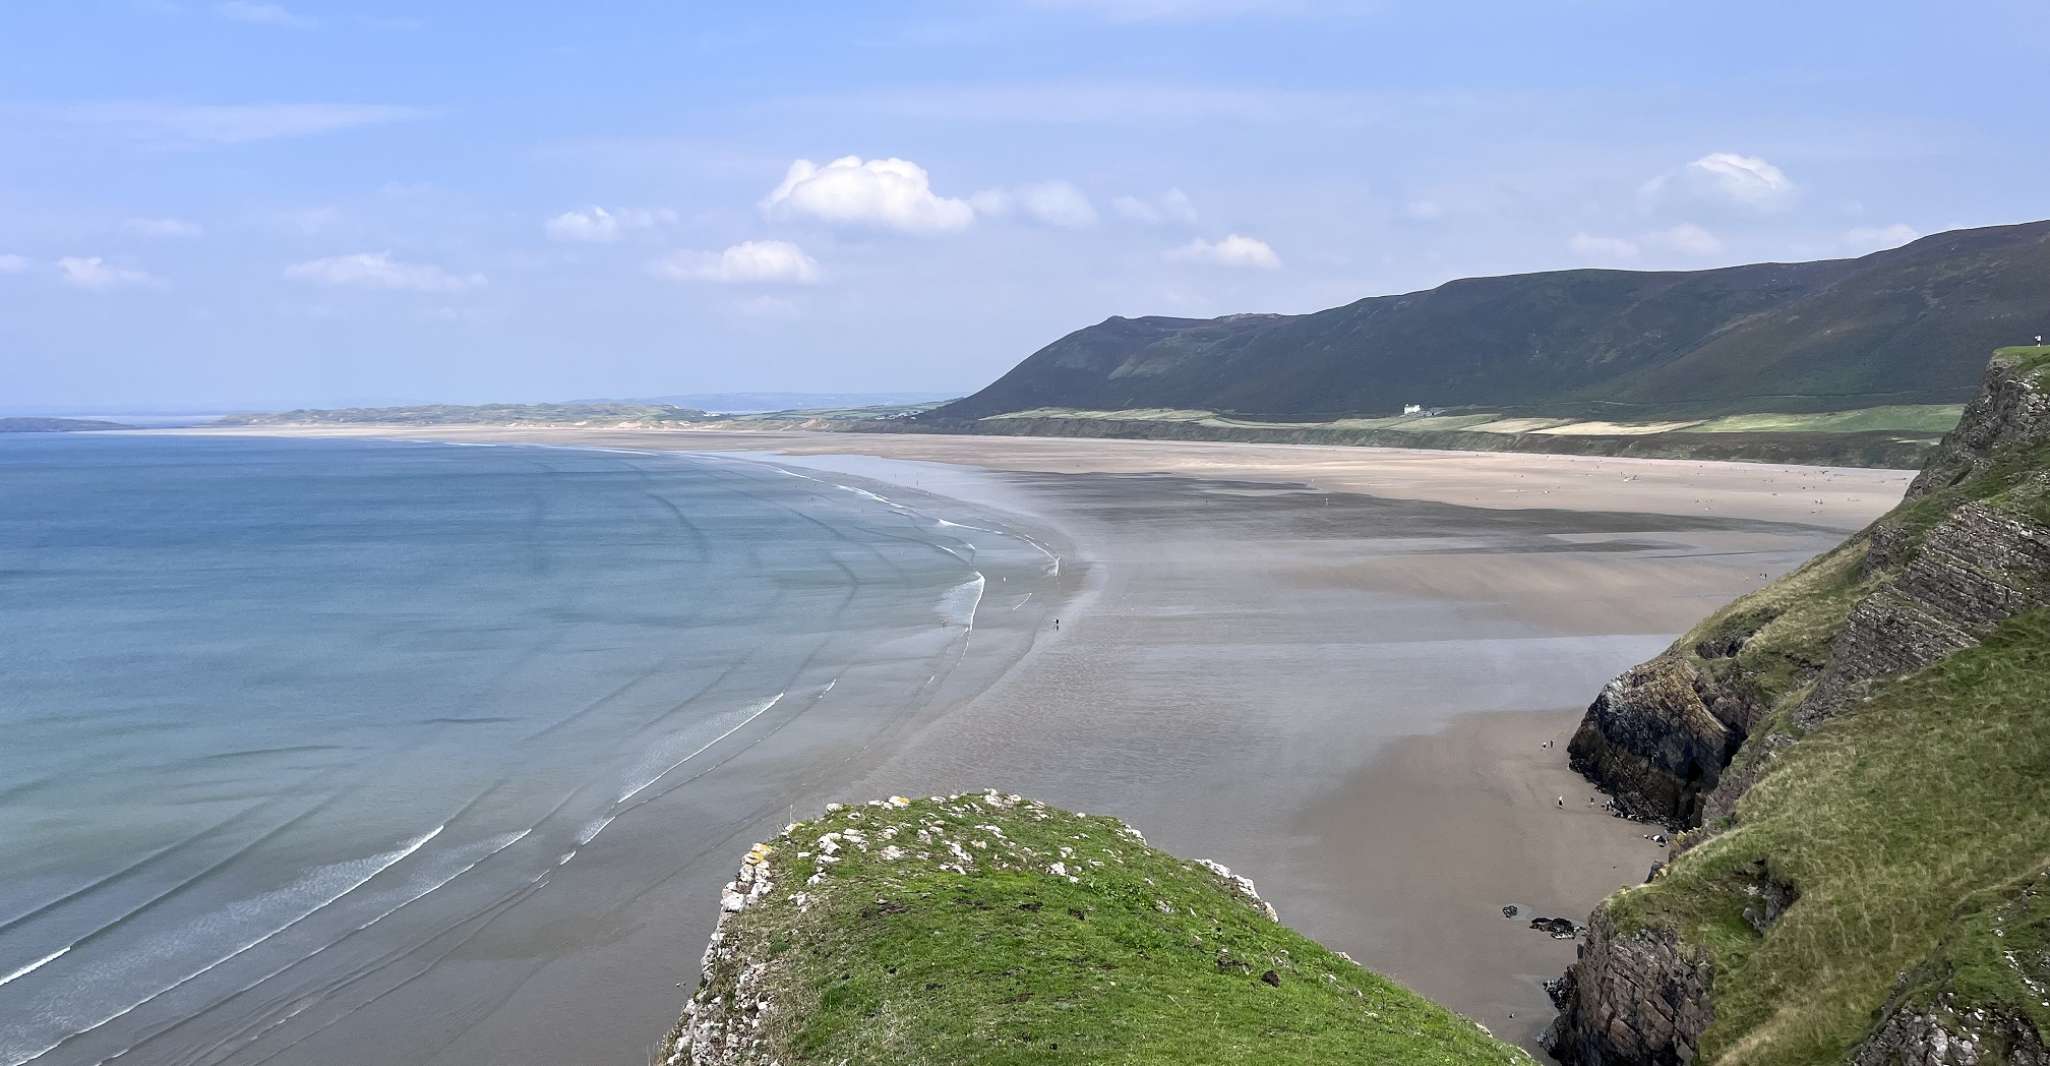 From Cardiff, Swansea, Mumbles and Gower Coast Full-Day Tour - Housity